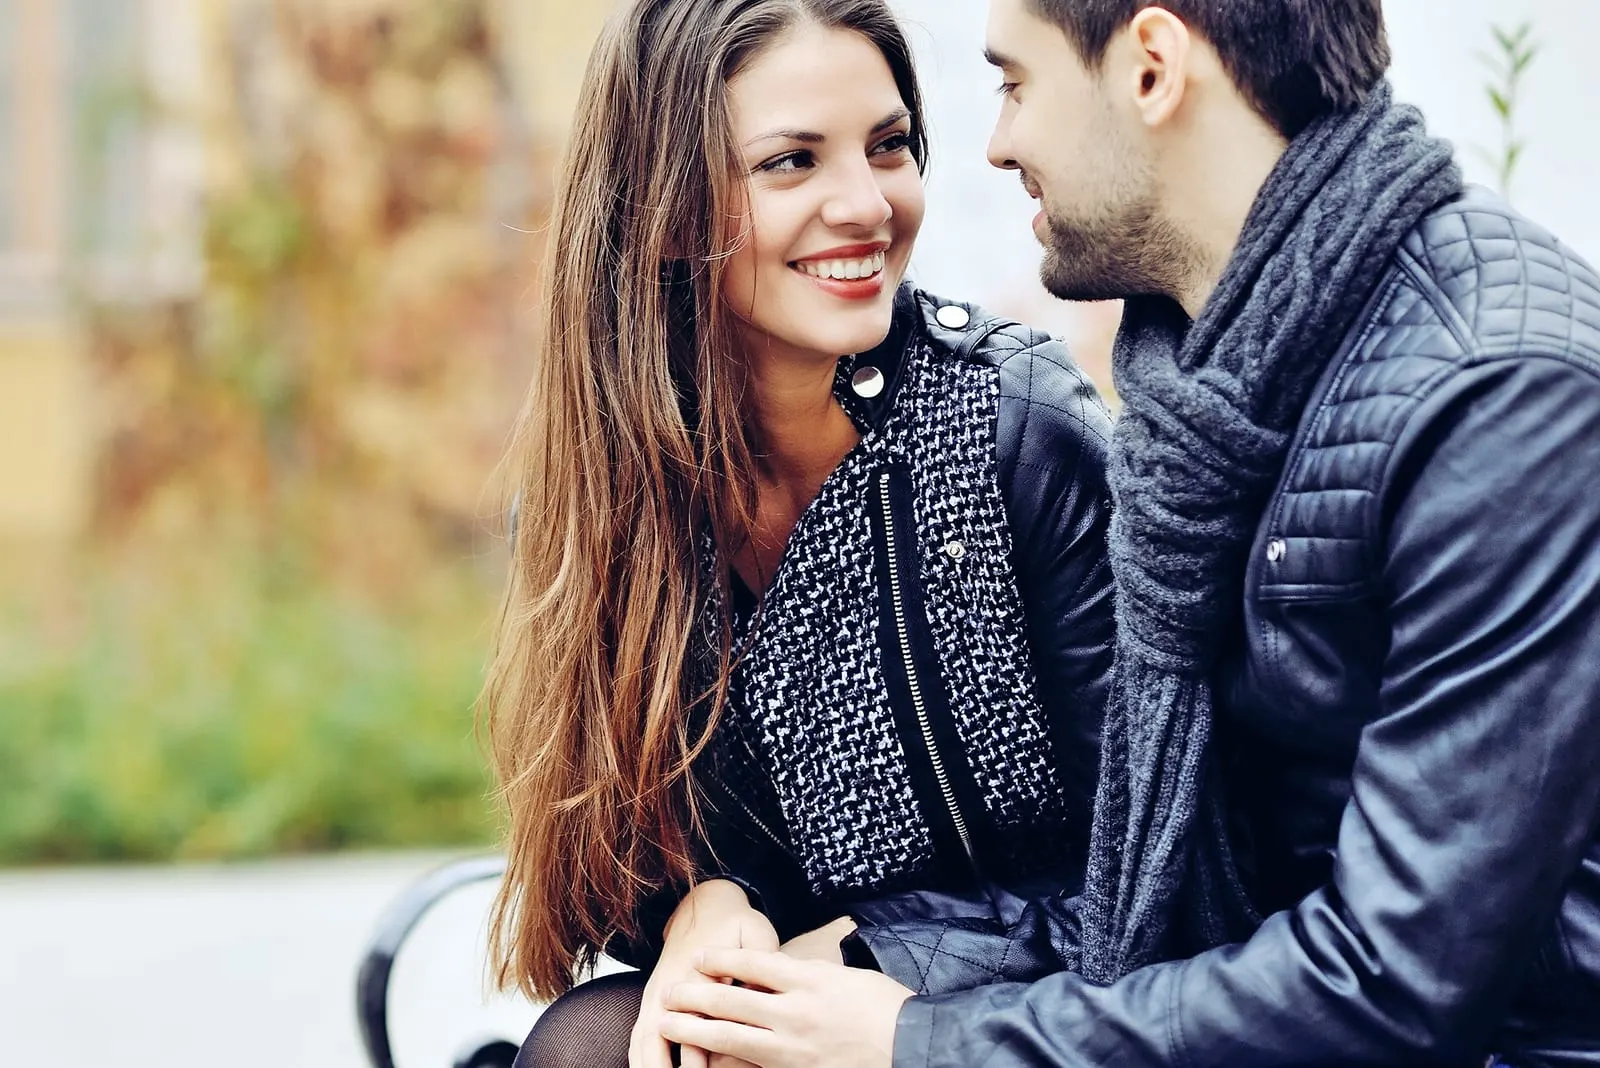  couple smiling and looking each other outdoors